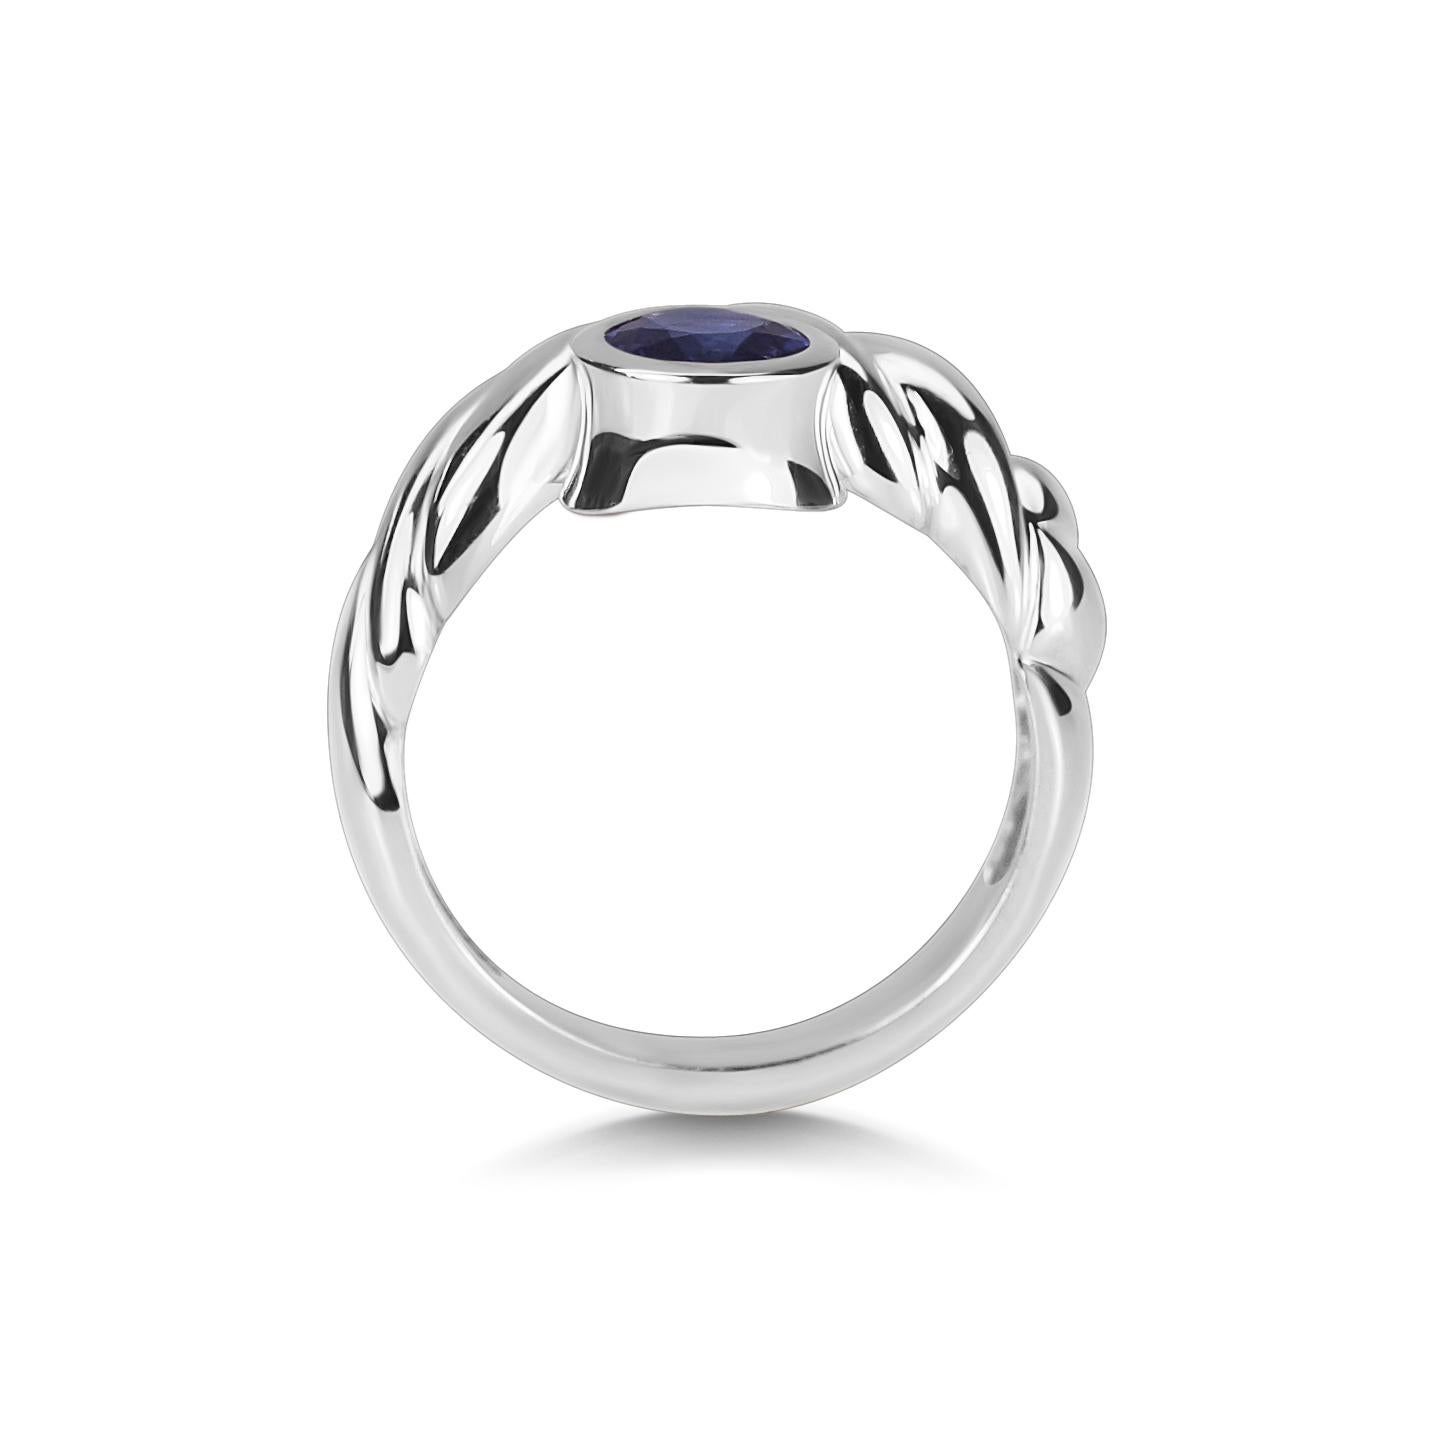 0.78ct Round Blue Sapphire in unique 18k White Gold inverted collet with carved band.

The ring is made to fingersize UK 'M', or US 6 1/2. 
If you wish a different fingersize, please add a note to your purchase and the ring can be sized slightly